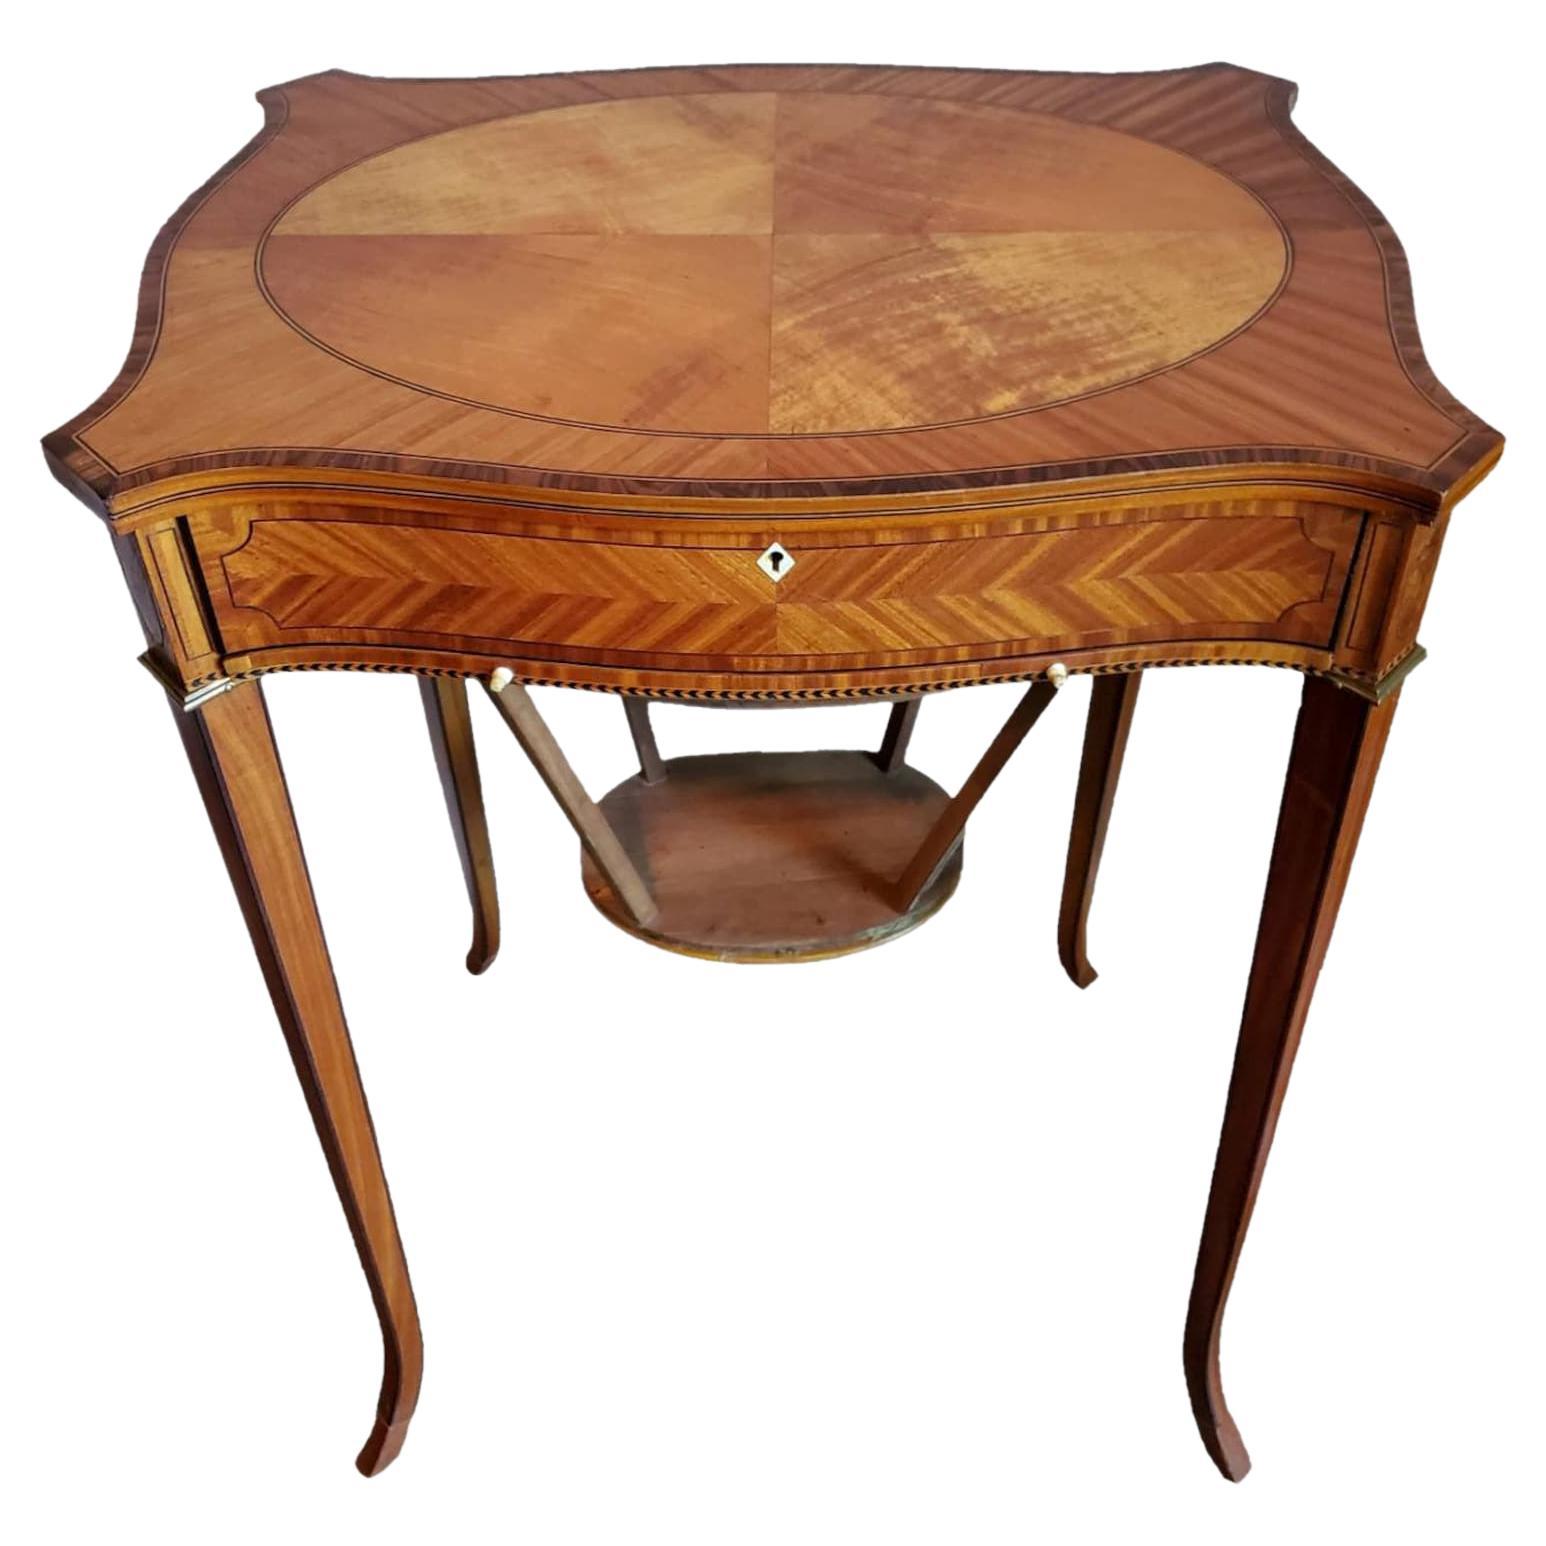 Antique English Edwardian Marquetry Inlaid Sewing Table For Sale